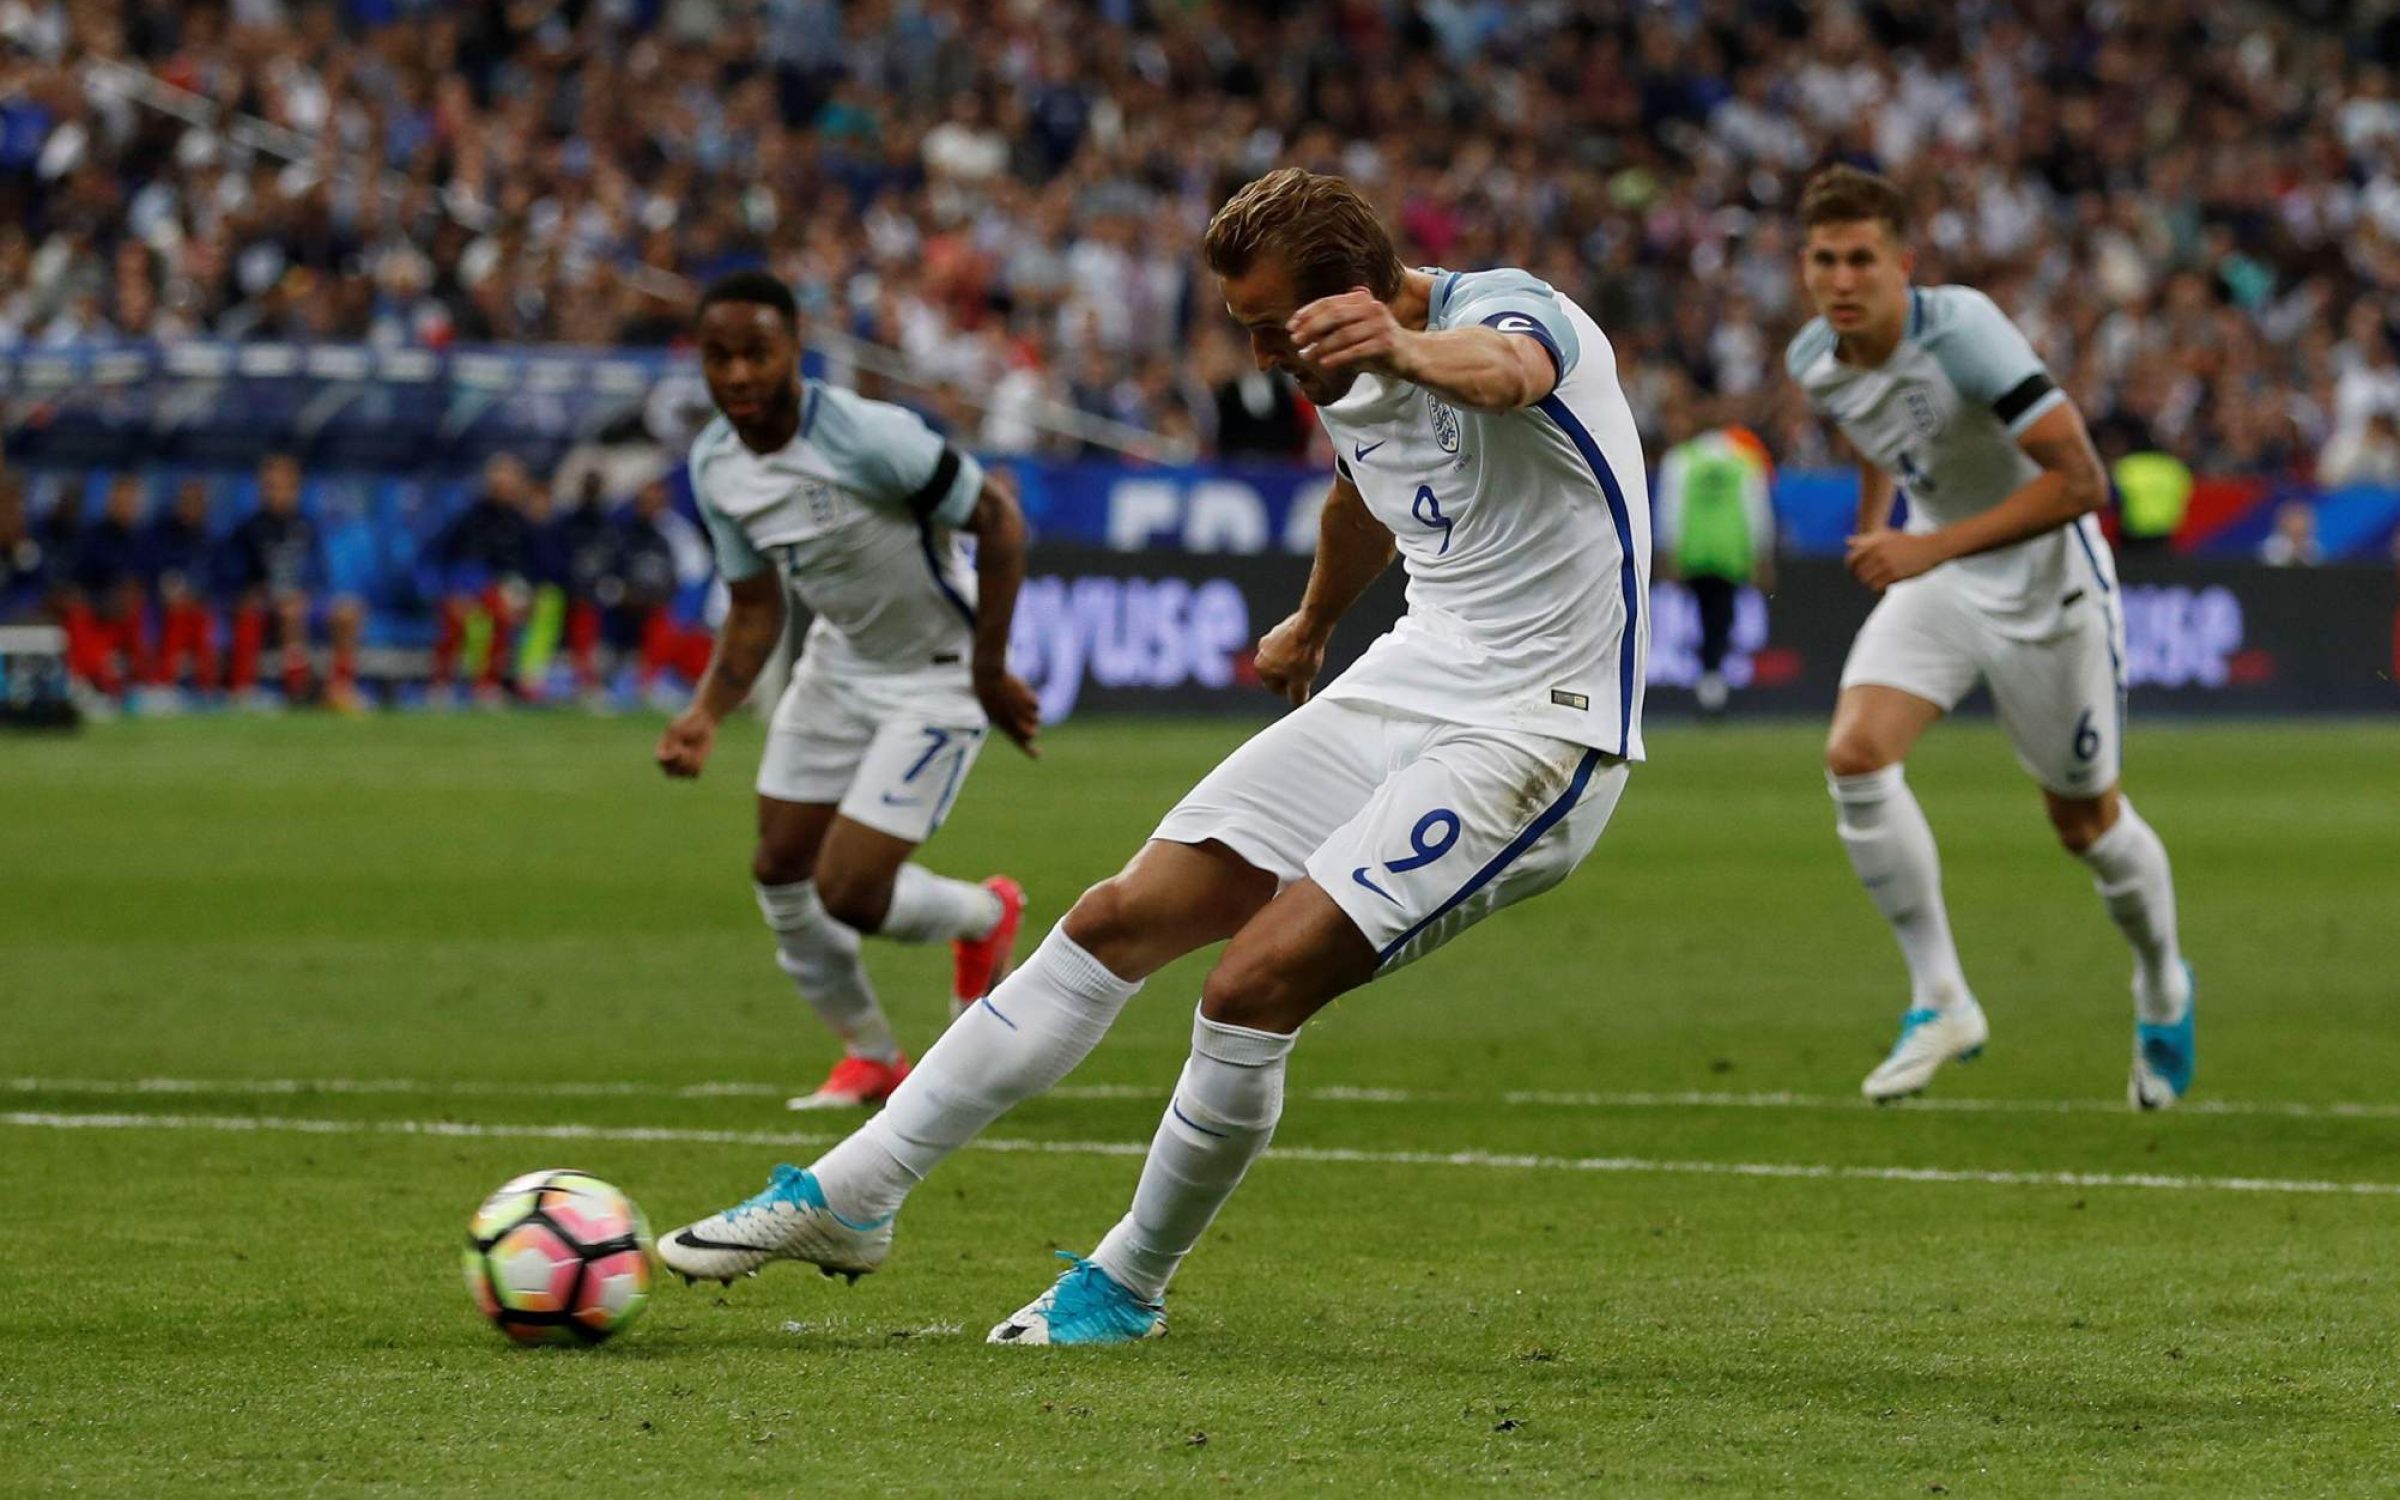 Harry Kane's penalty miss sent England out of the World Cup on Saturday.